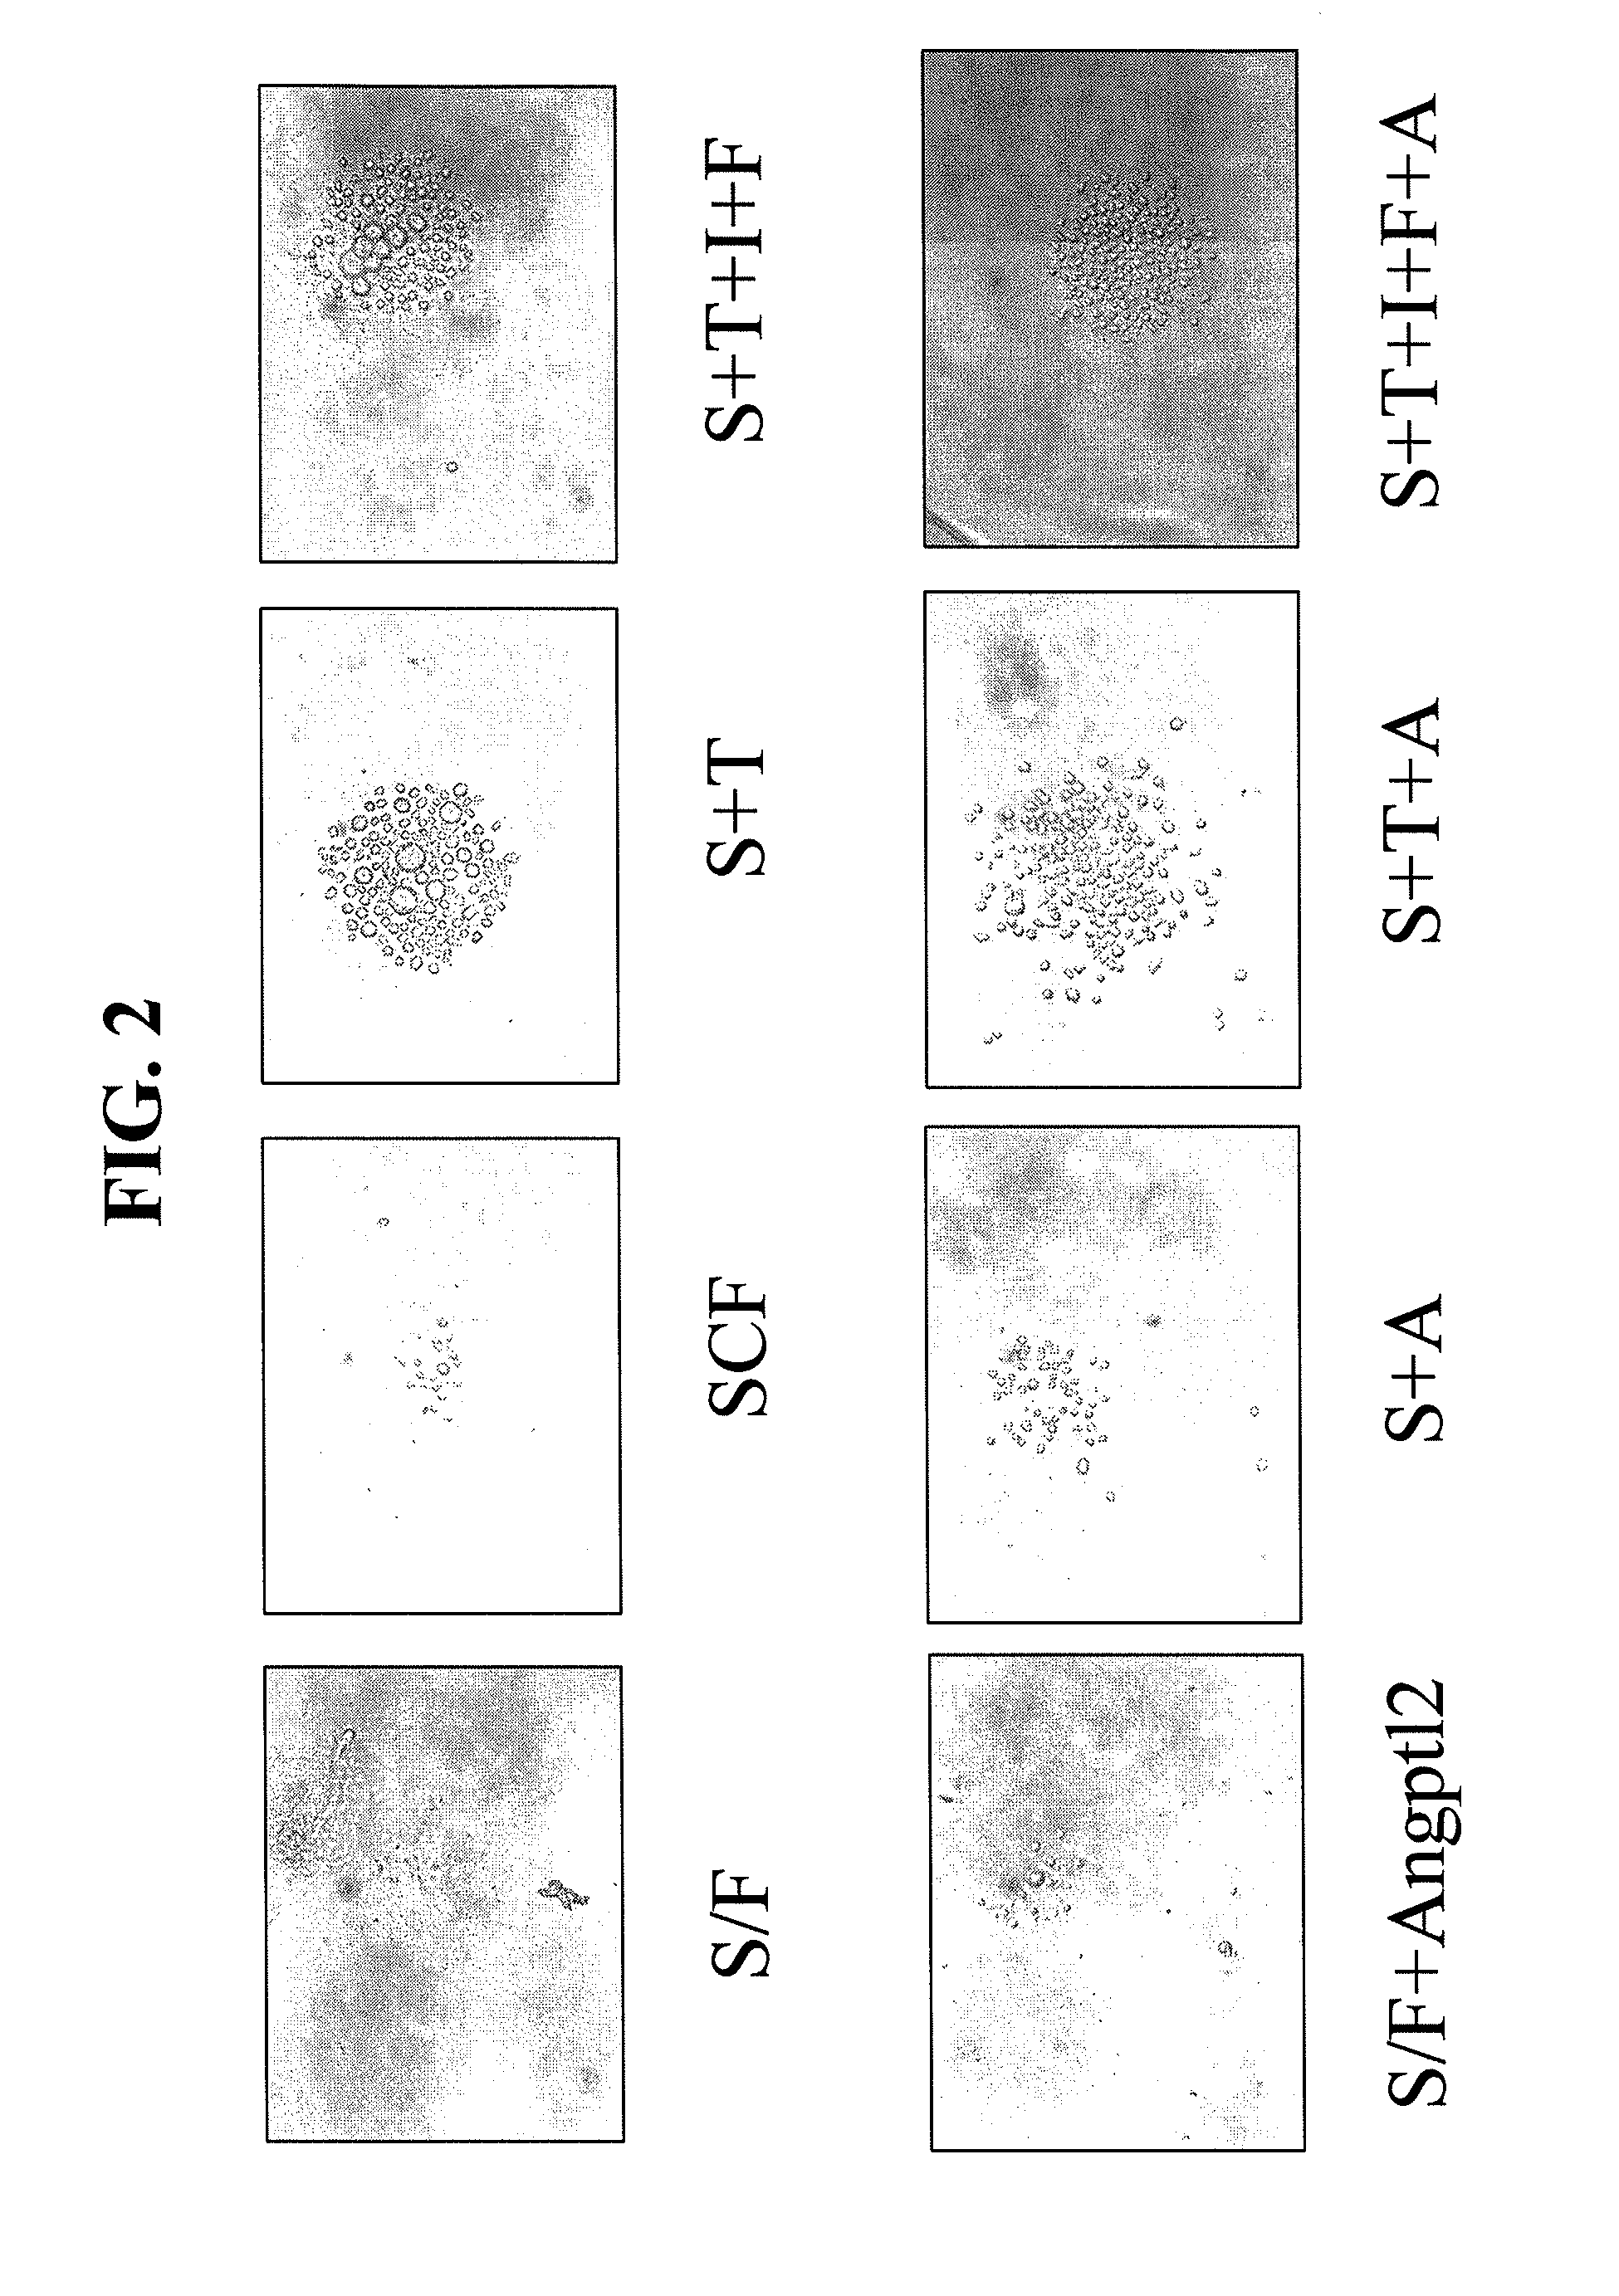 Methods for Expansion and Analysis of Cultured Hematopoietic Stem Cells